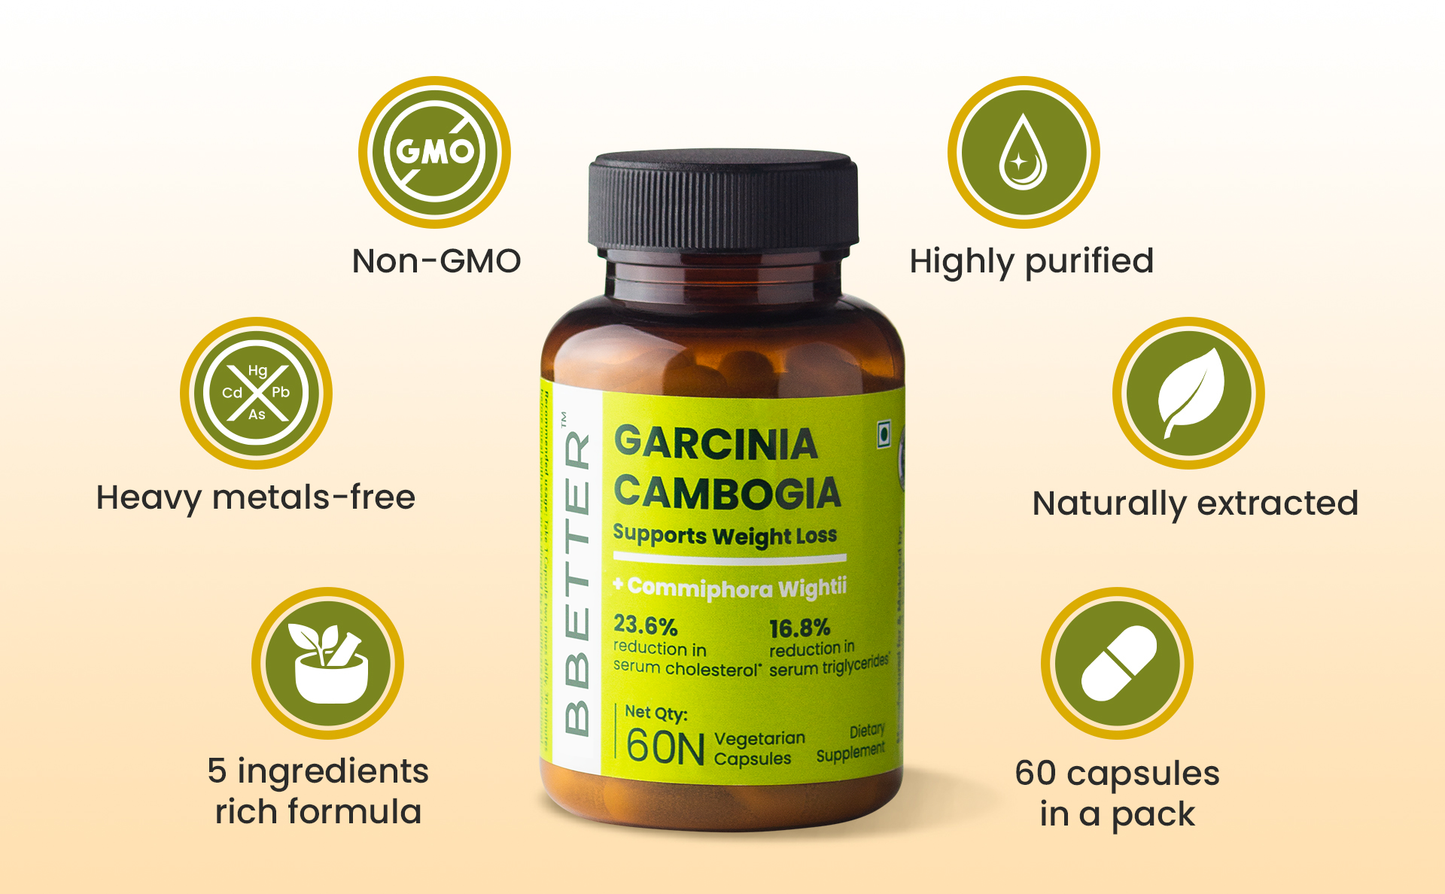 BBETTER Garcinia Cambogia With Ayurvedic Herbs - 2 Month Supply